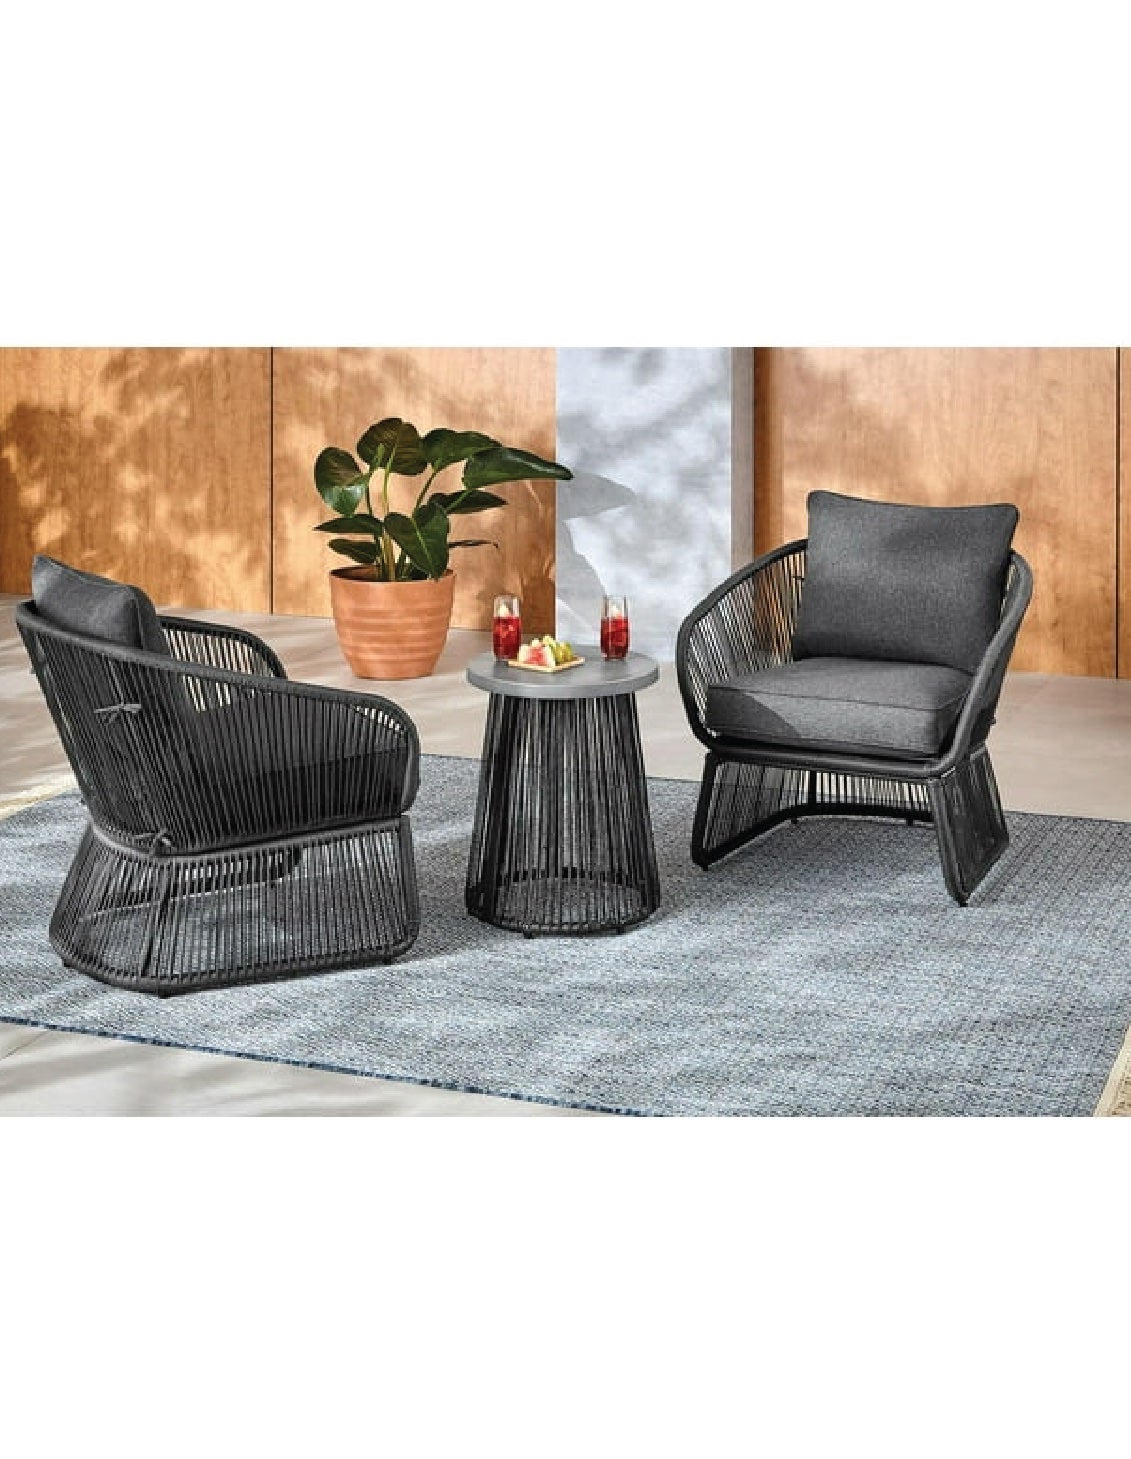 two black wicker chairs and small black table